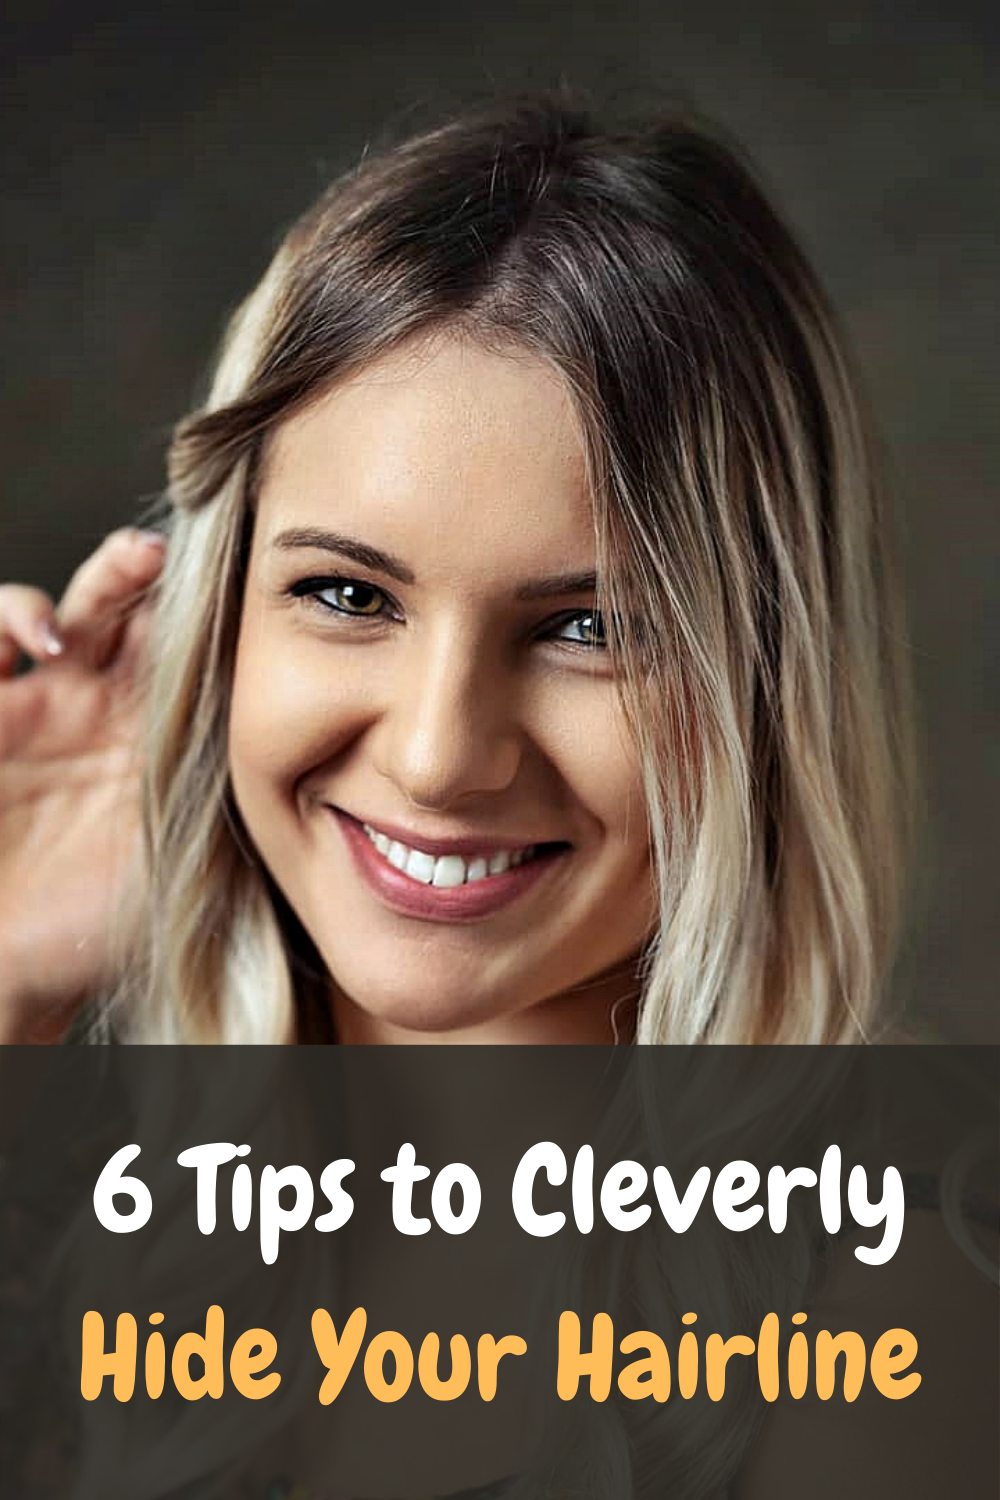 6 Tips to Cleverly Hide Your Hairline